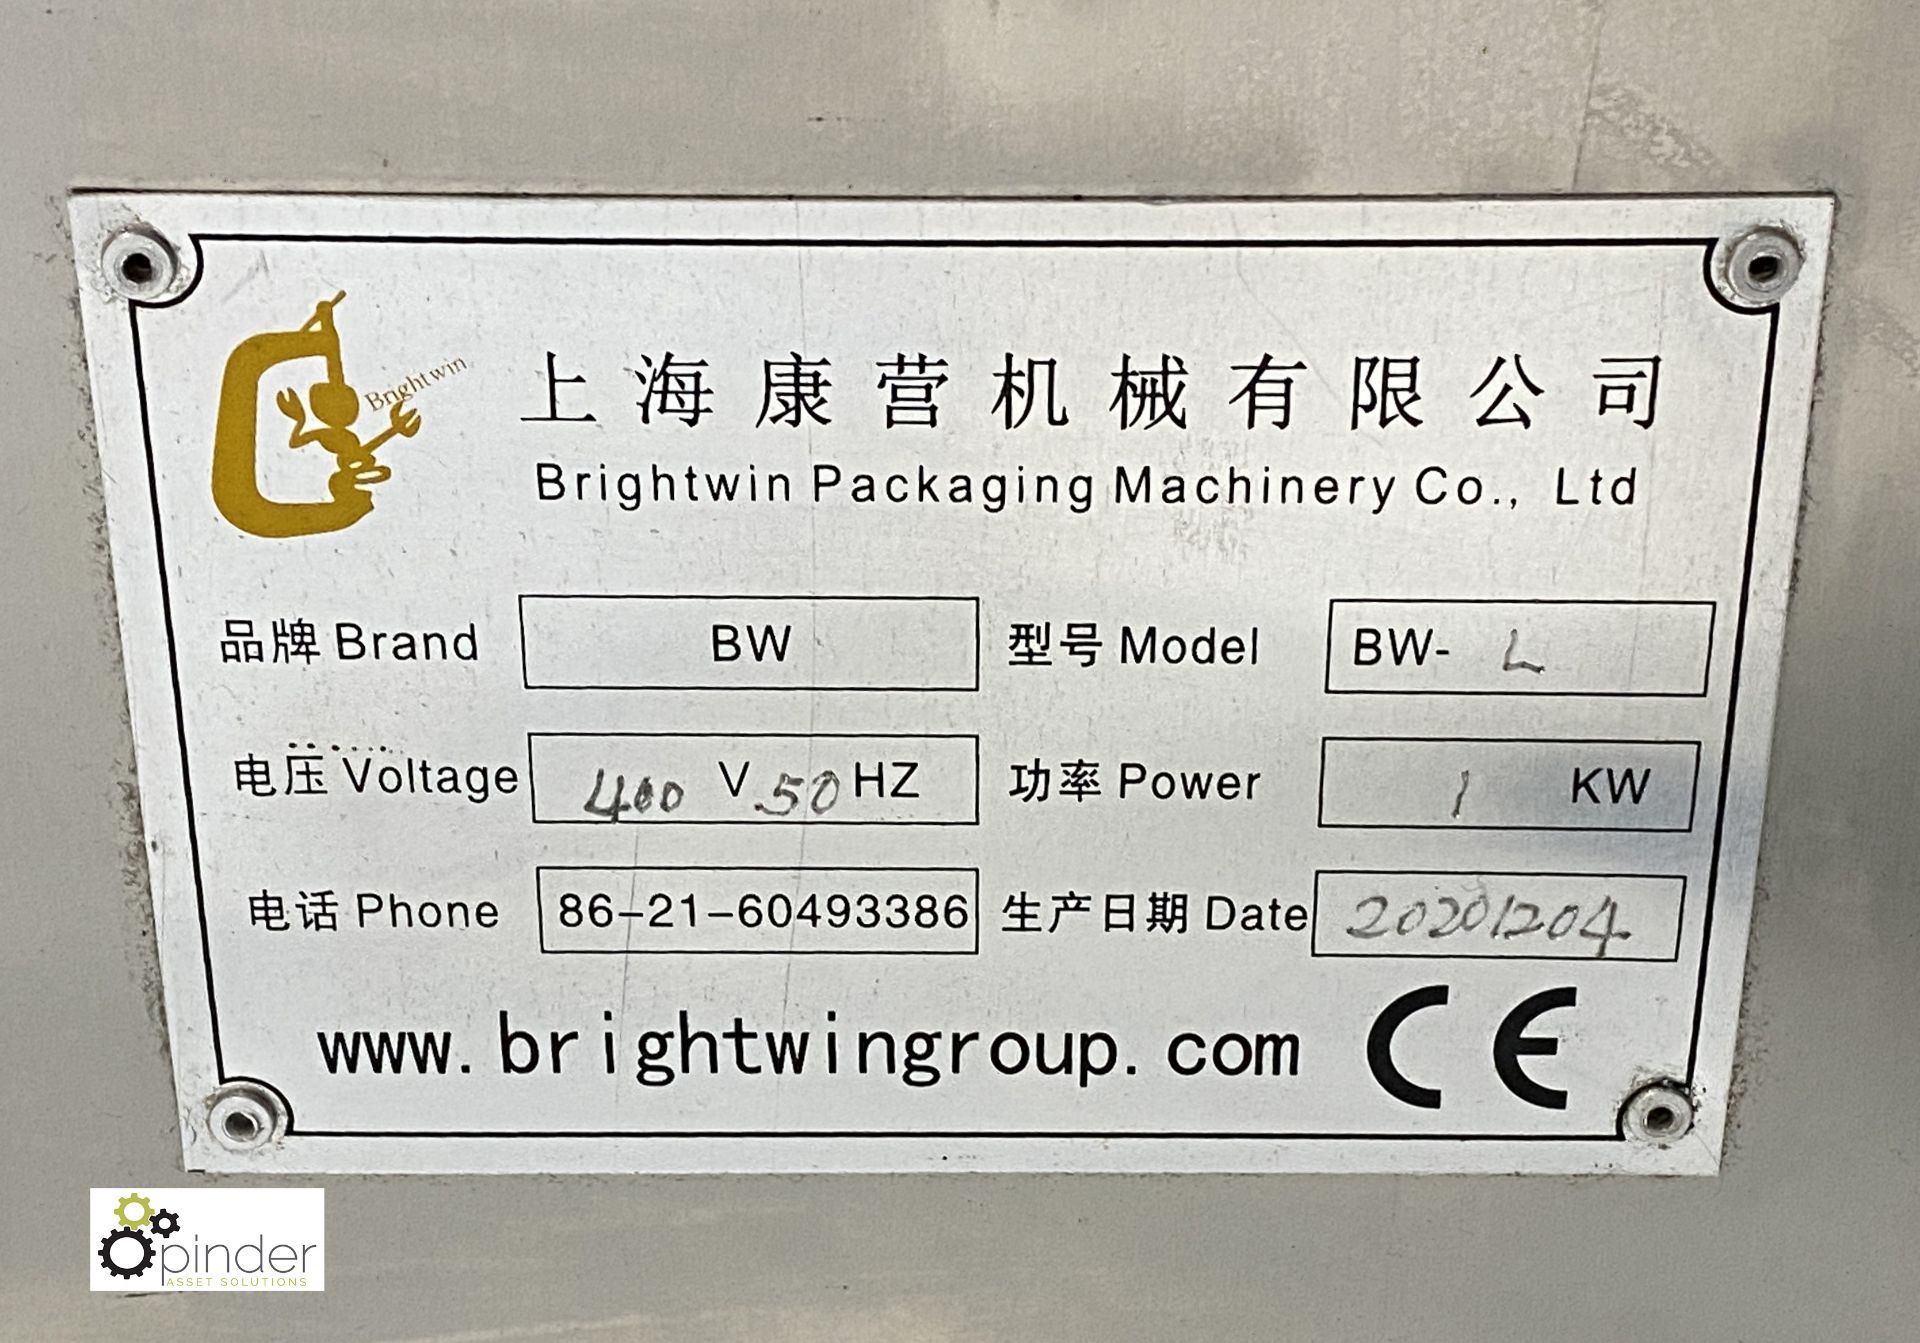 Brightwin Packaging Machinery Co Ltd BWL stainless steel Labeller for use applying labels to - Image 3 of 9